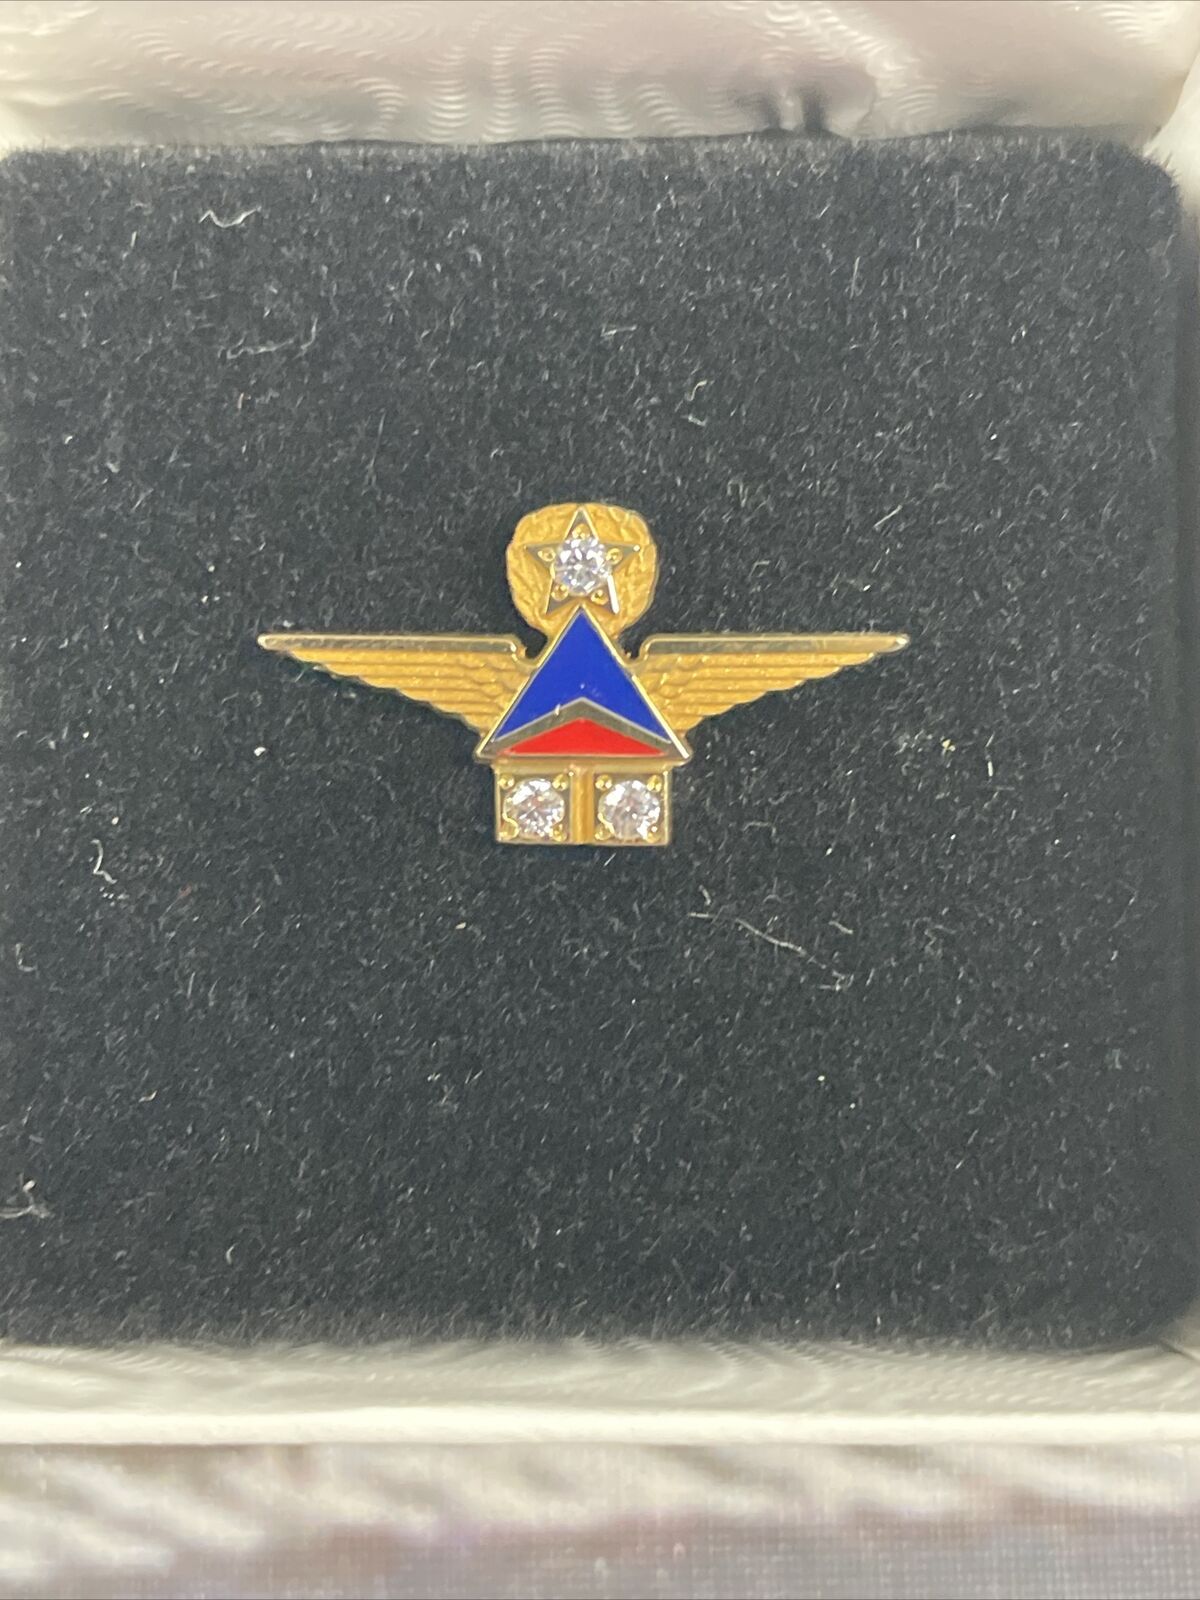 Rare Delta Air Lines 45 Years Service Award 10k Gold Pin With 3 Diamond Stones